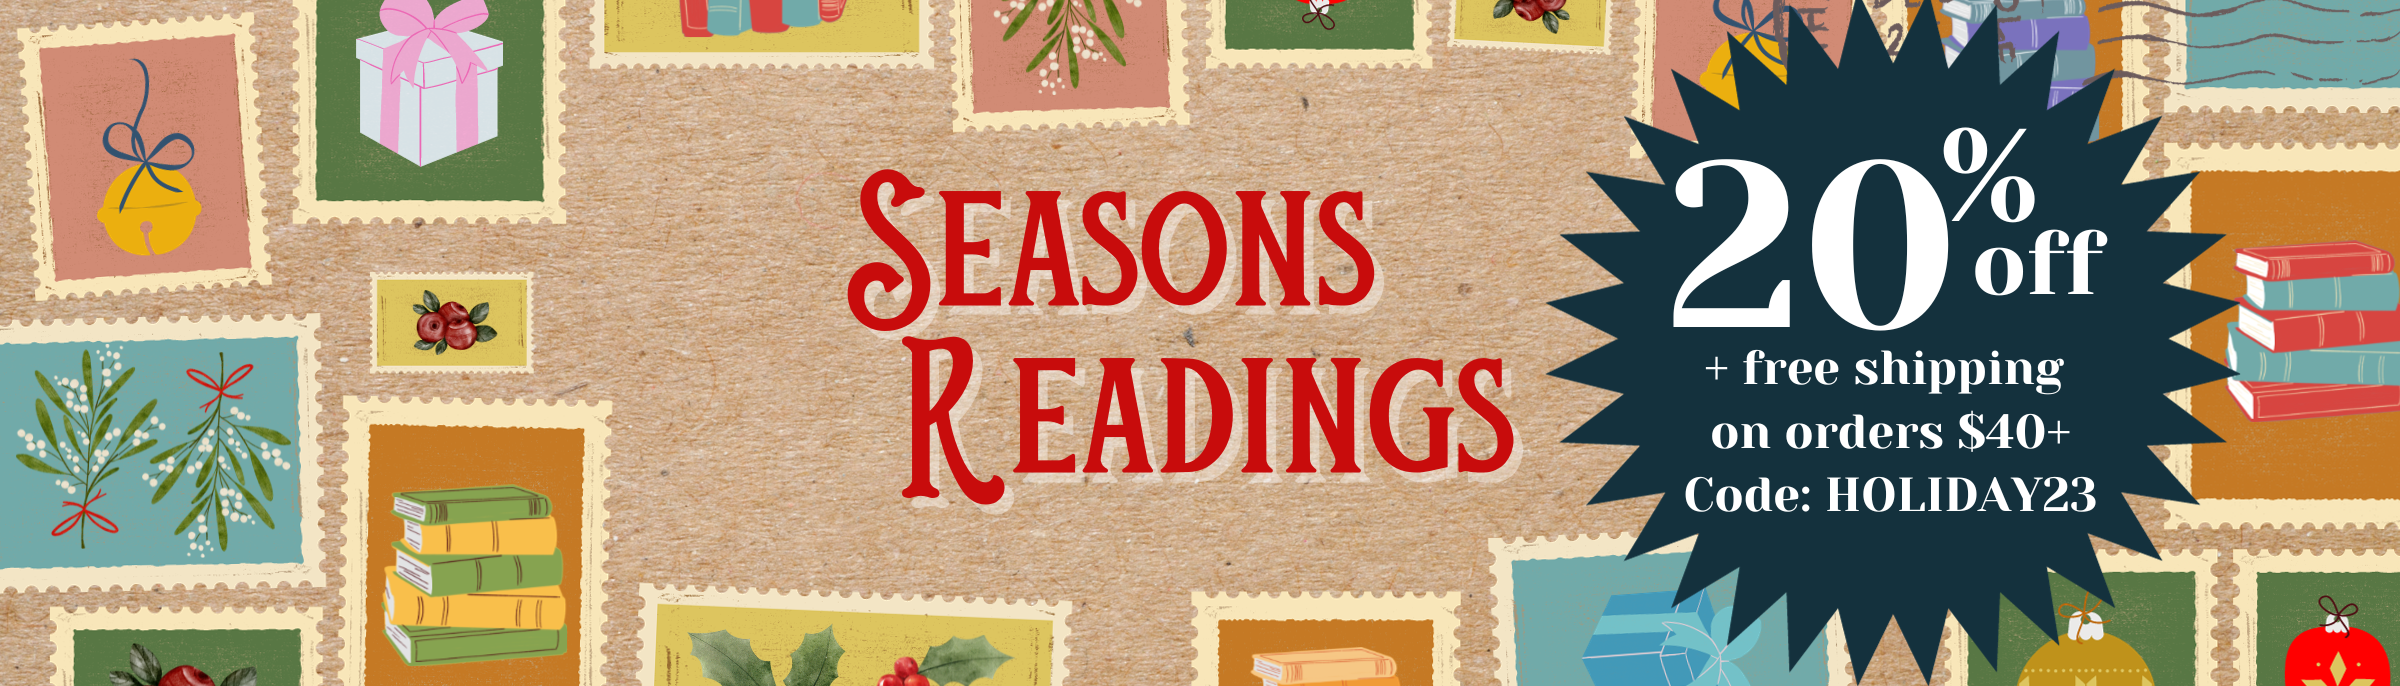 Seasons Readings! 
20% off + free shipping 
on orders $40+
Code: HOLIDAY23